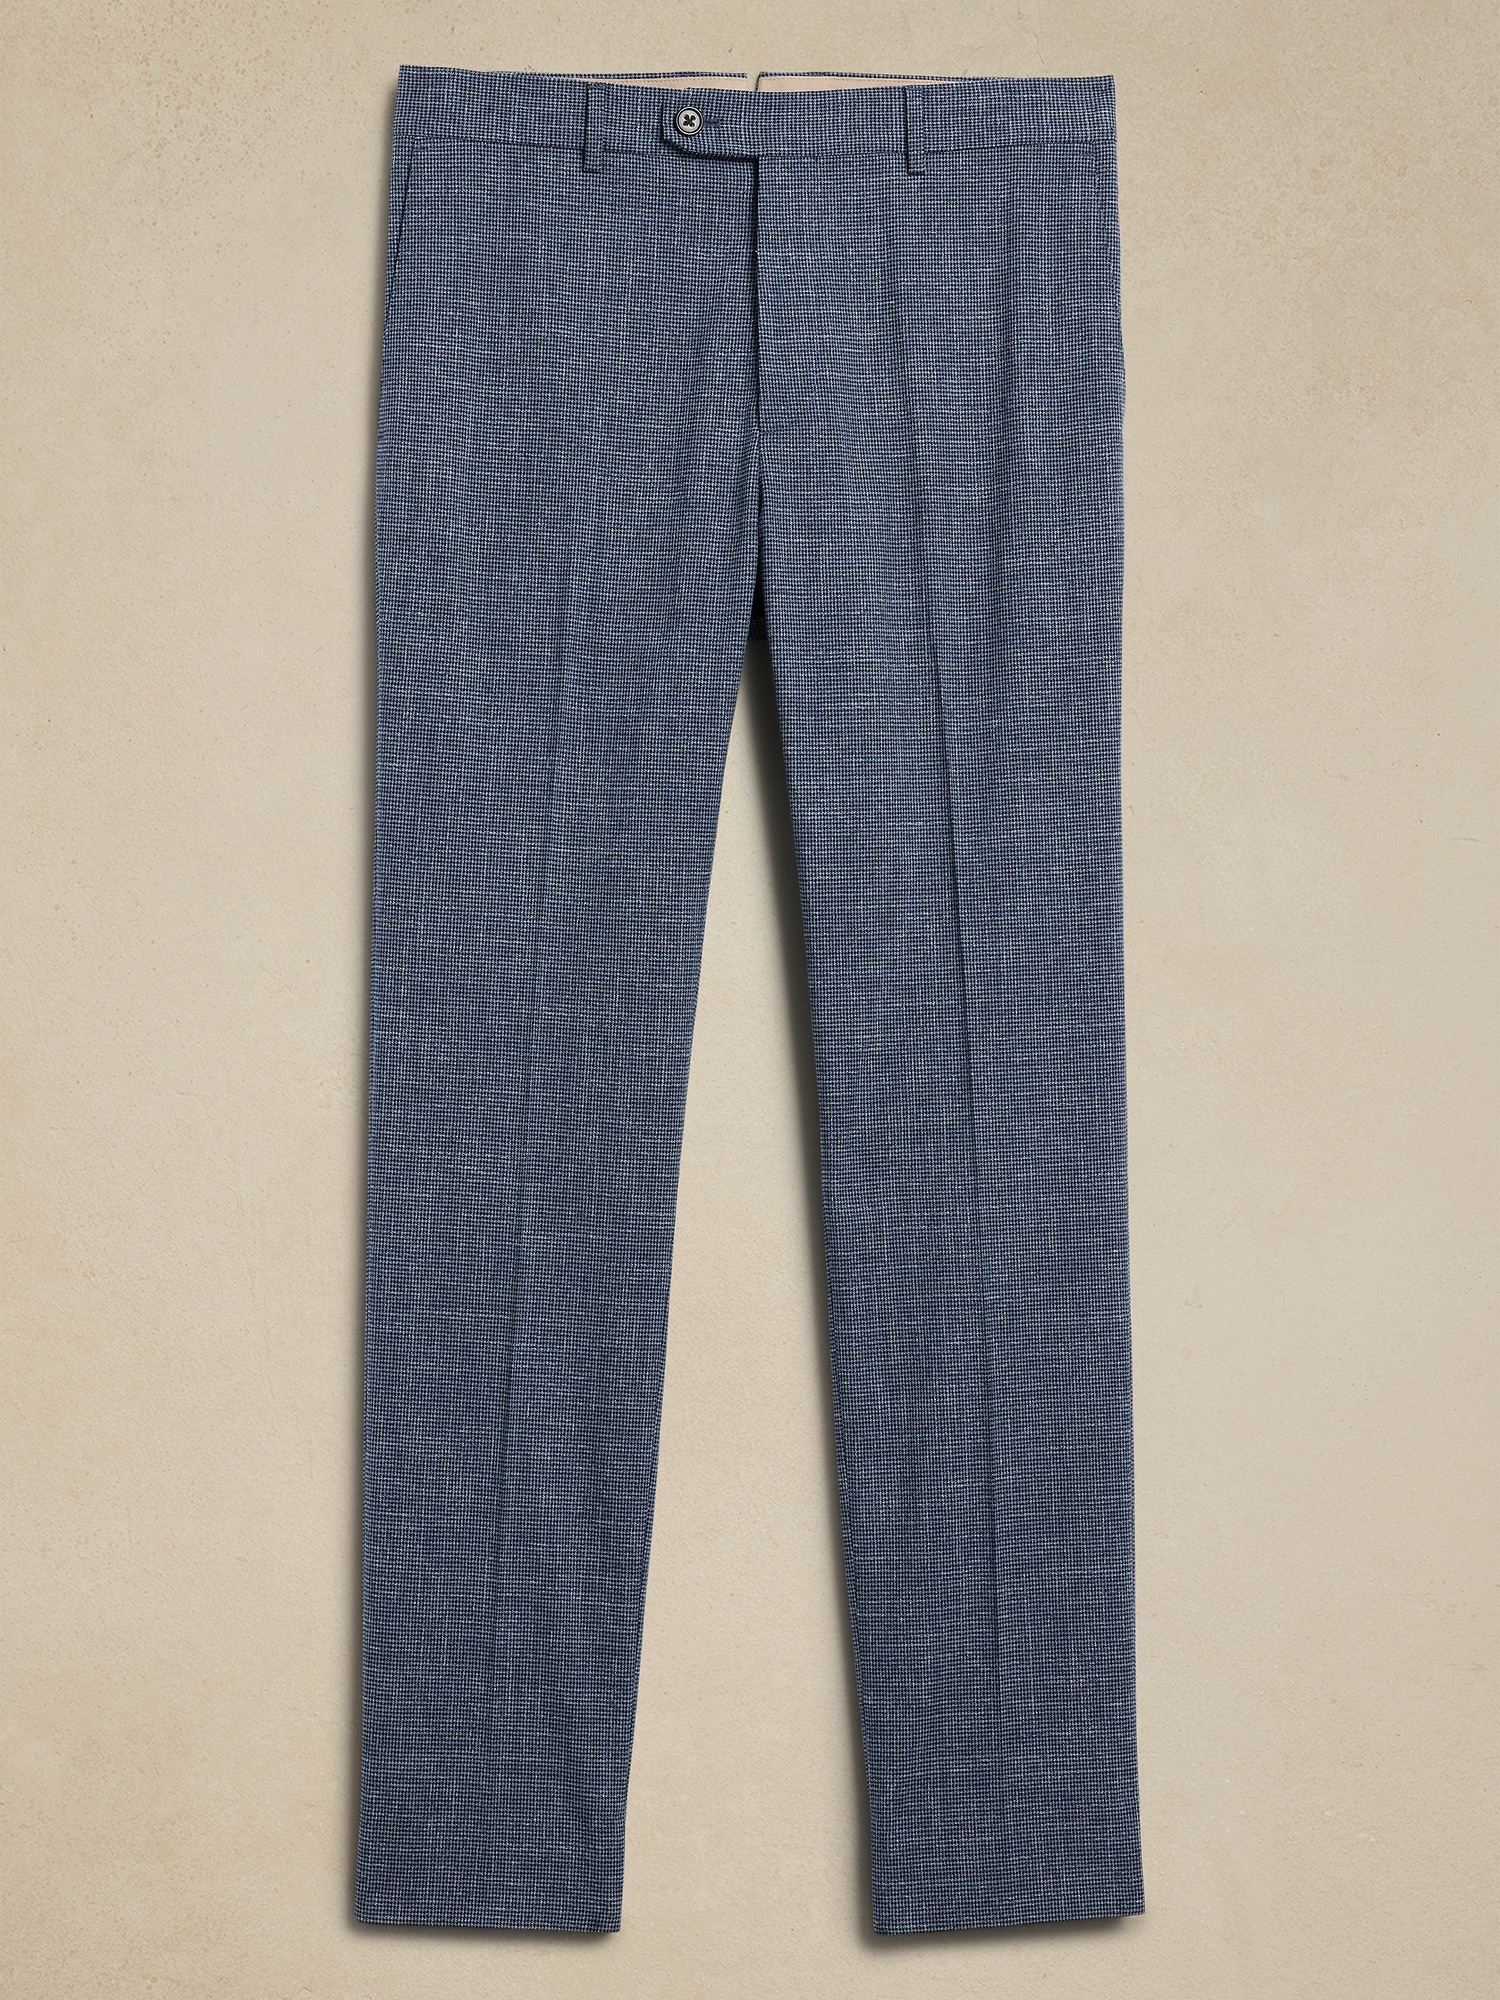 STYLAND tailored tapered-leg trousers - Grey